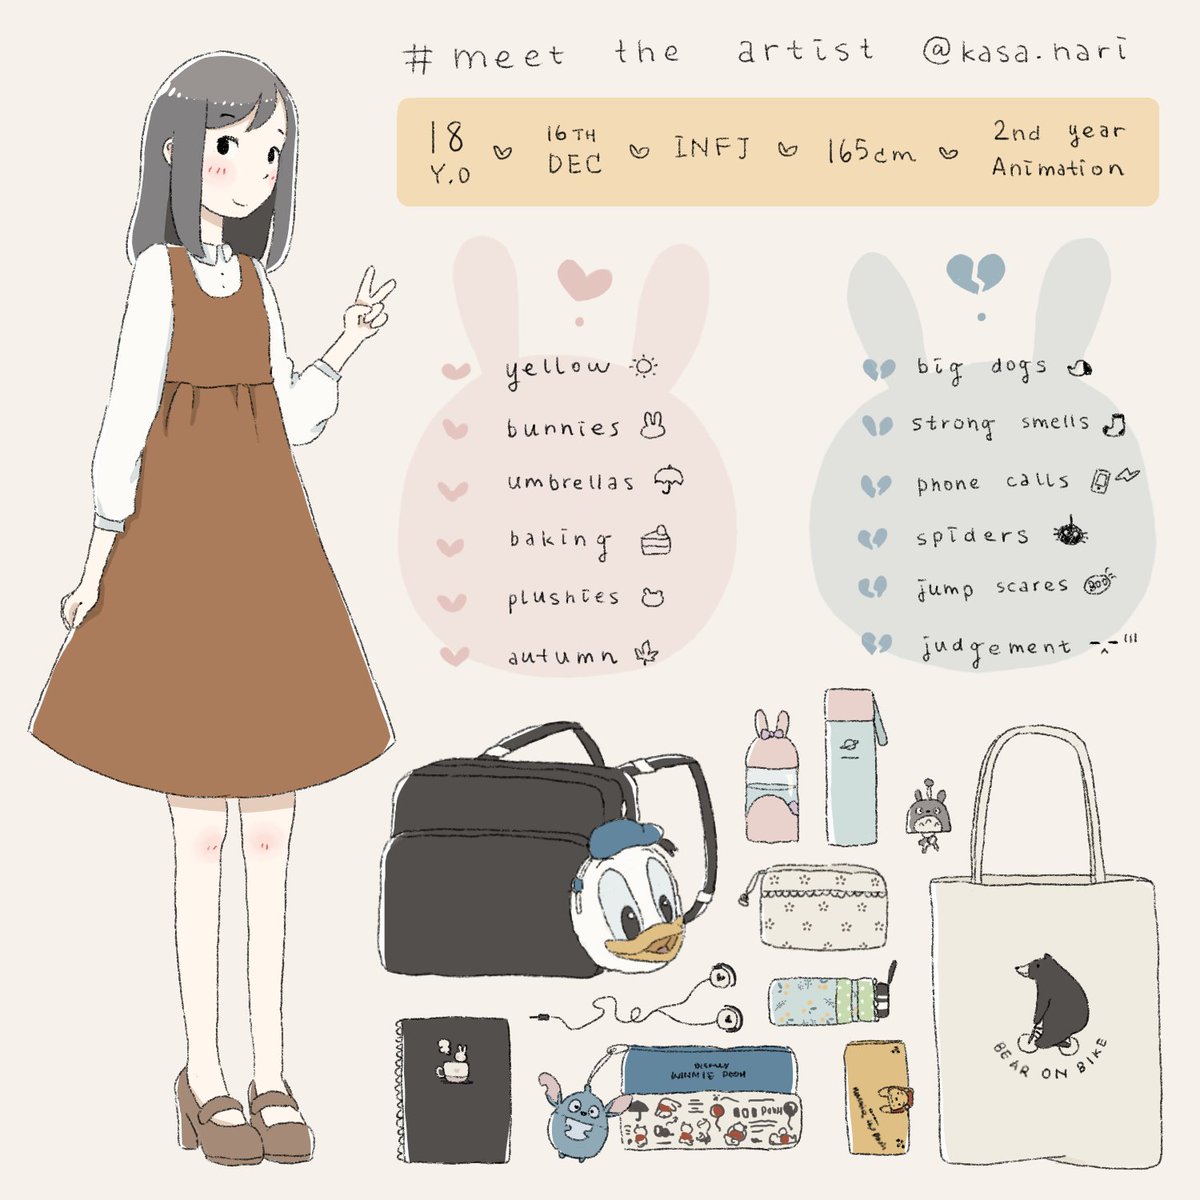 Twitter 上的 N A R I Hello Everyone This Is Nari I Thought I D Make A Meettheartist Because I Just Realised I Ve Never Done One Before Meettheartist Selfintroduction Whatsinmybag Drawing Illustration